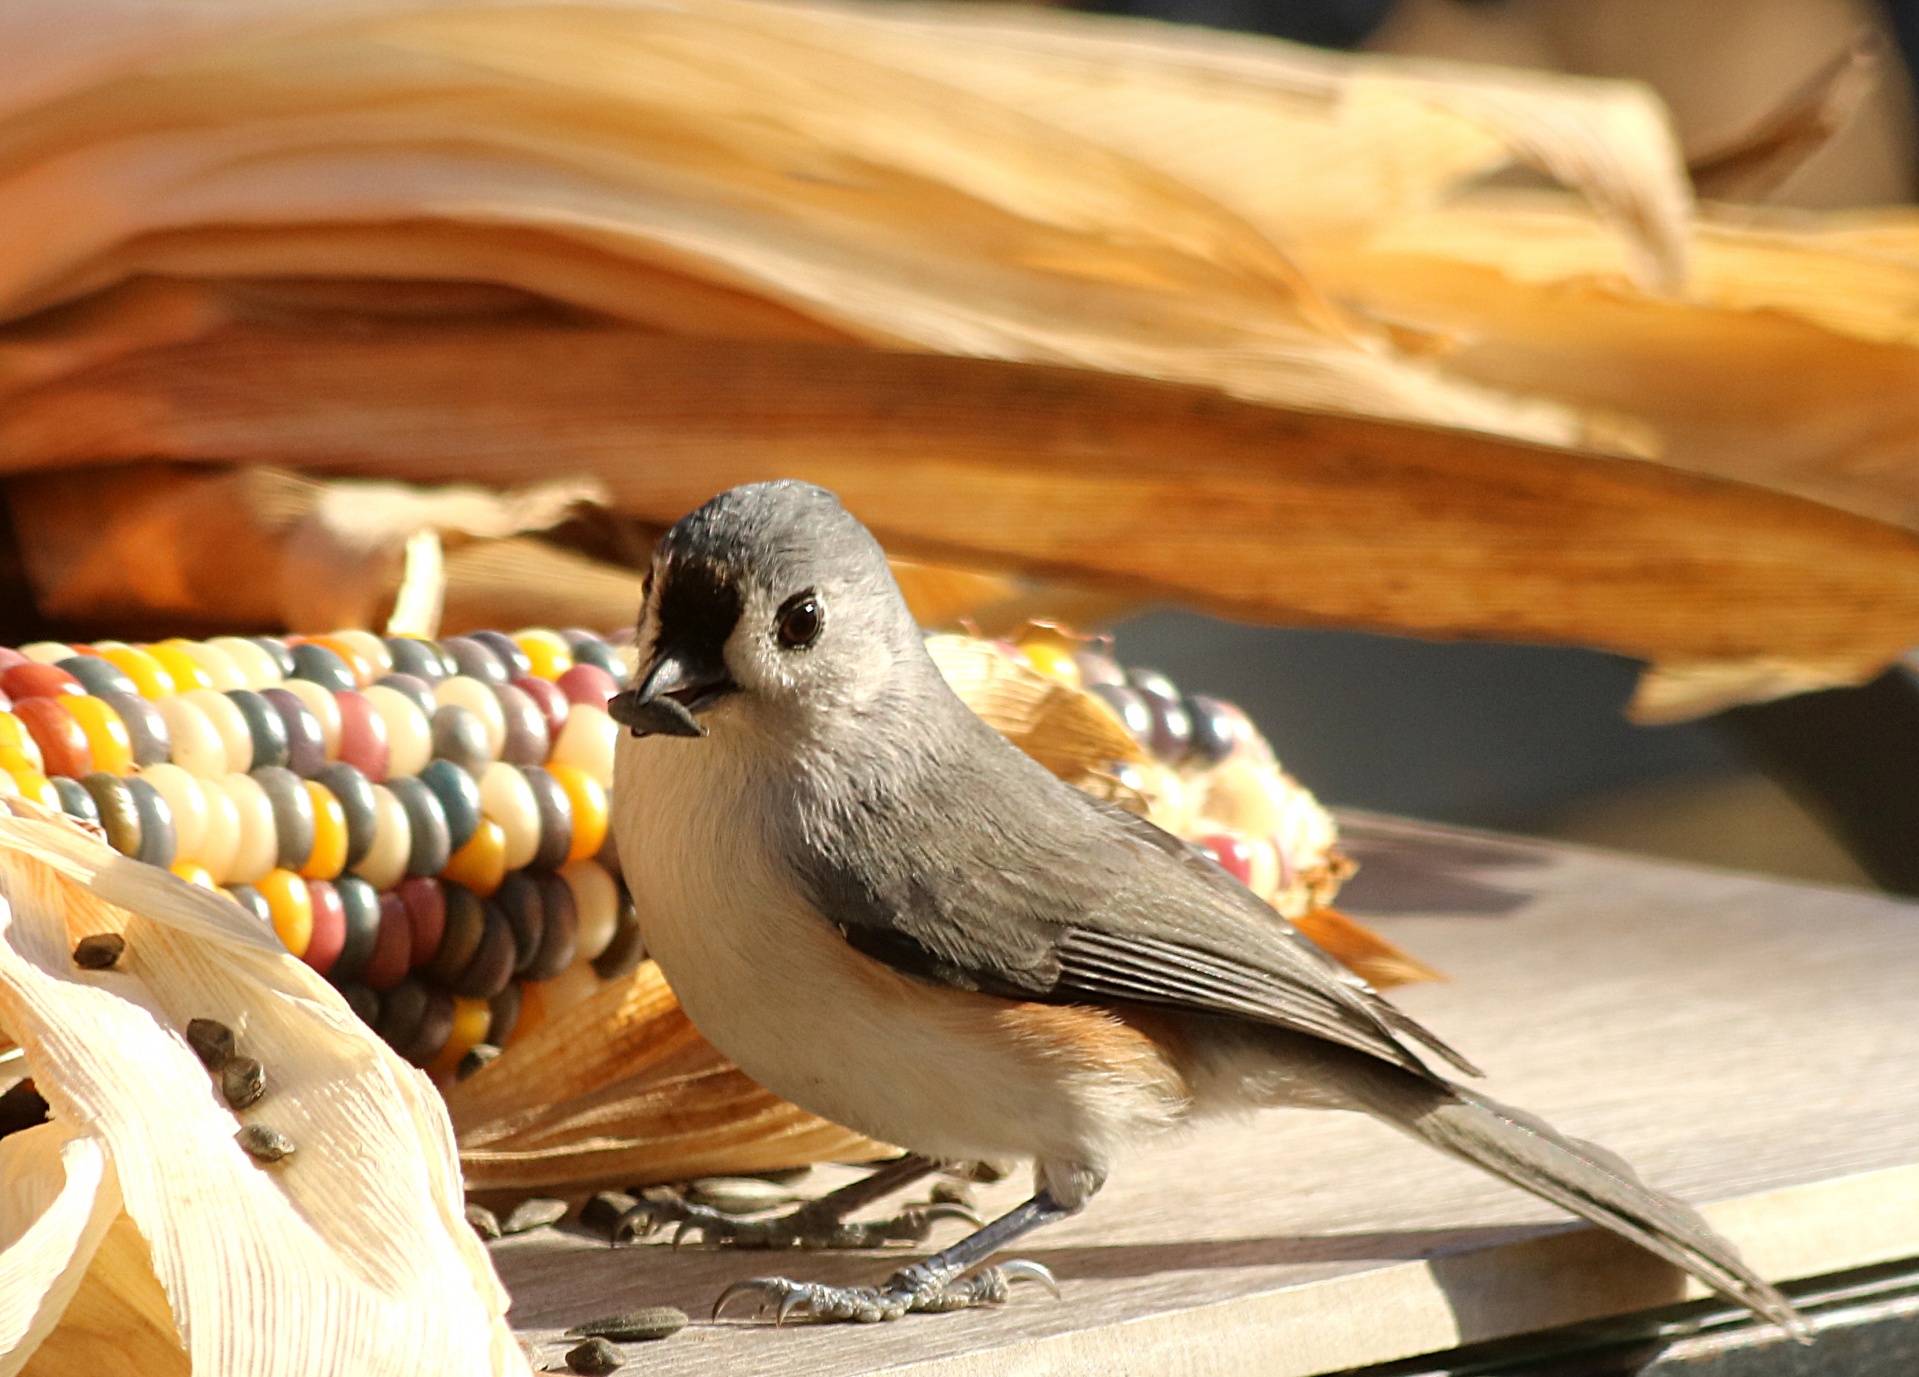 Close-up of a cute little tufted titmouse bird sitting on a table in front of Indian corn, holding a sunflower seed in its beak.